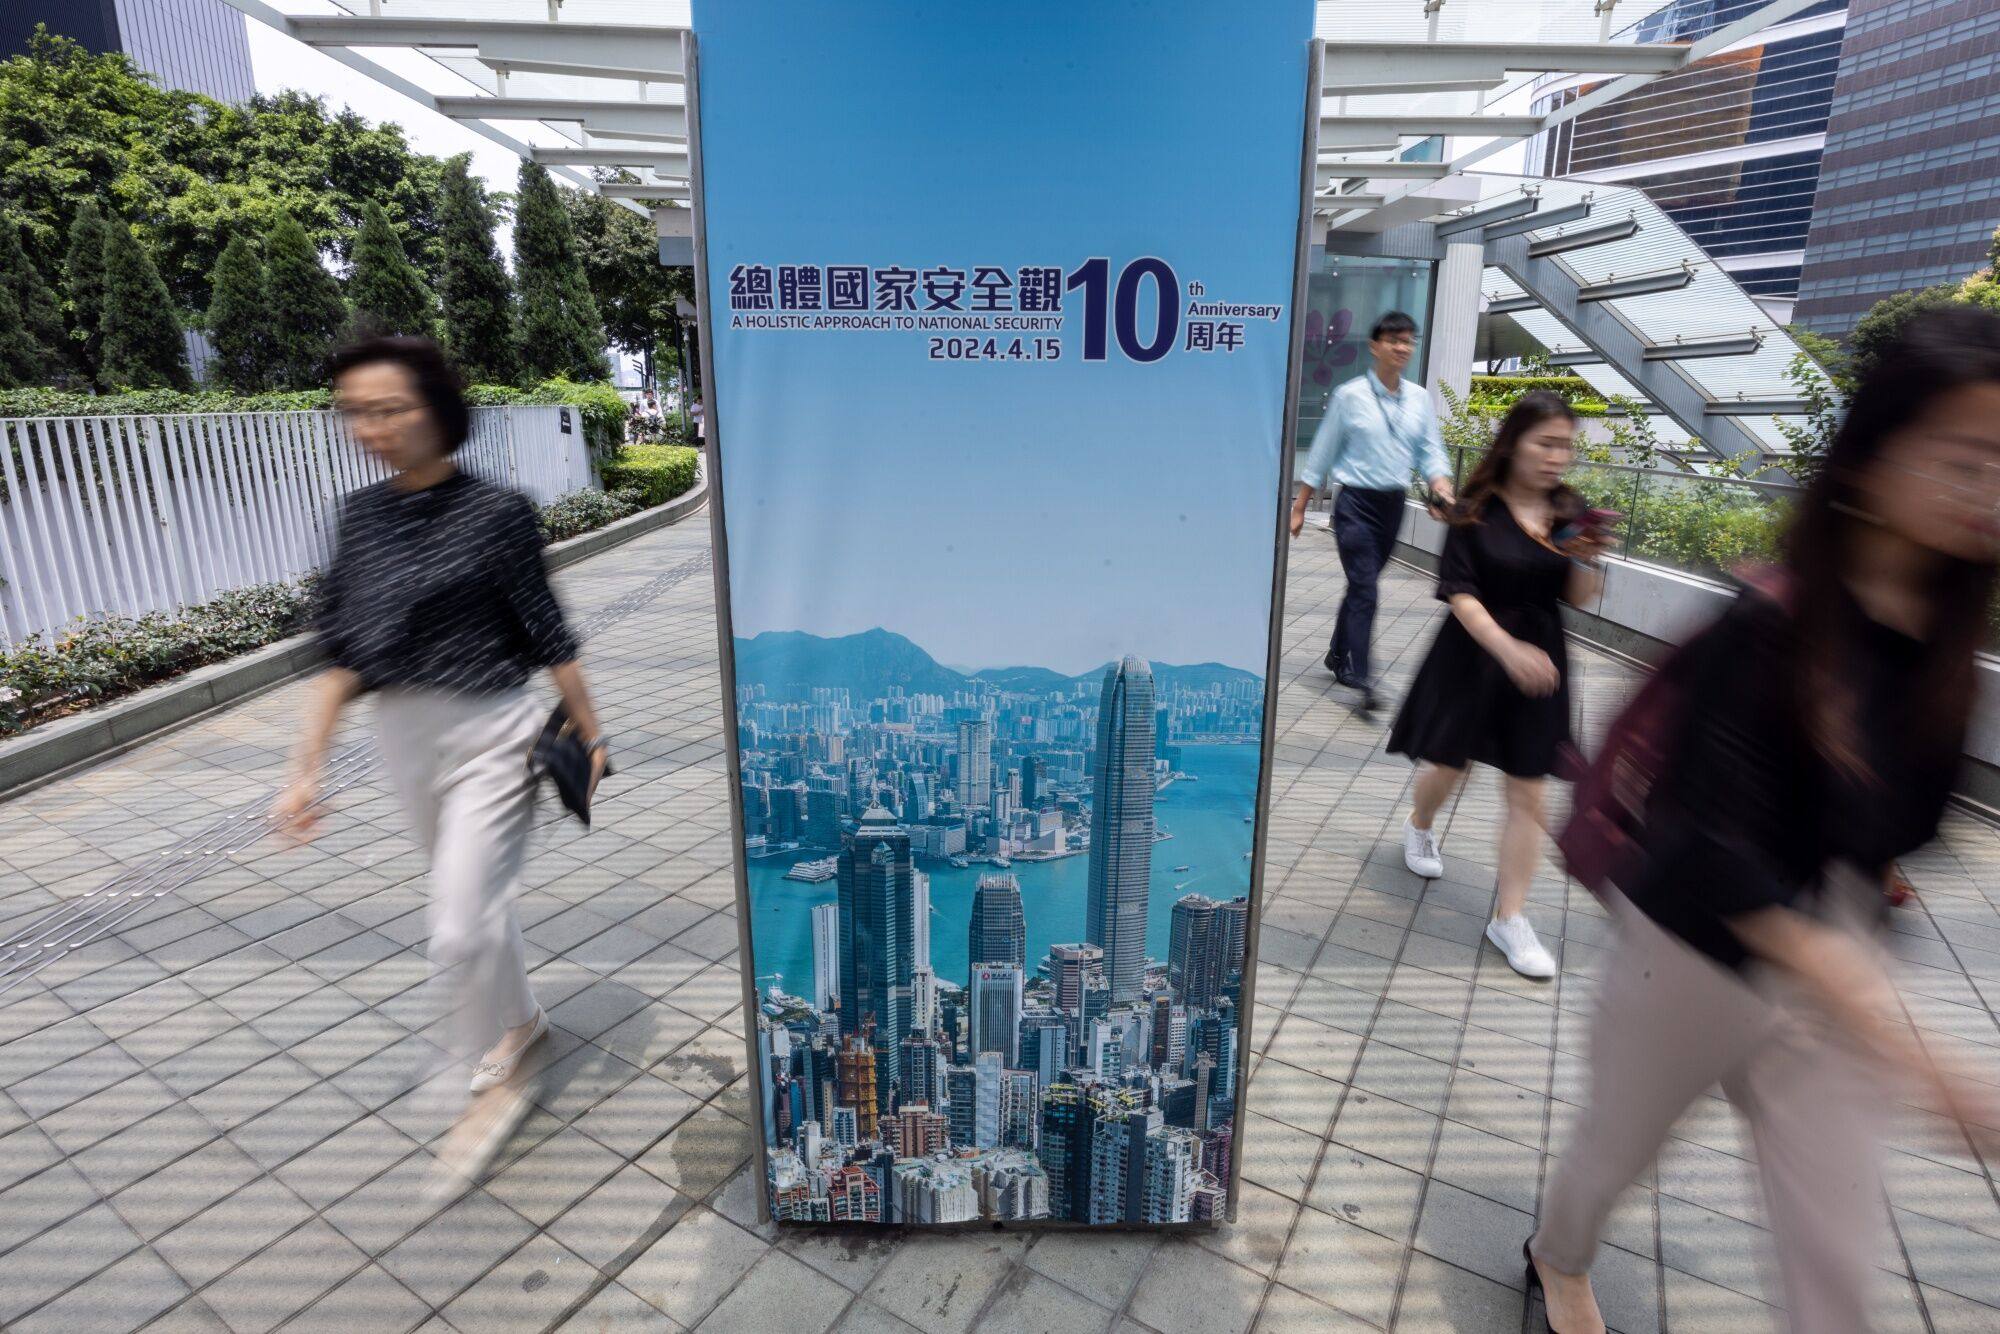 A government-sponsored advertisement promotes National Security Education Day in Hong Kong on April 15. Photo: Bloomberg